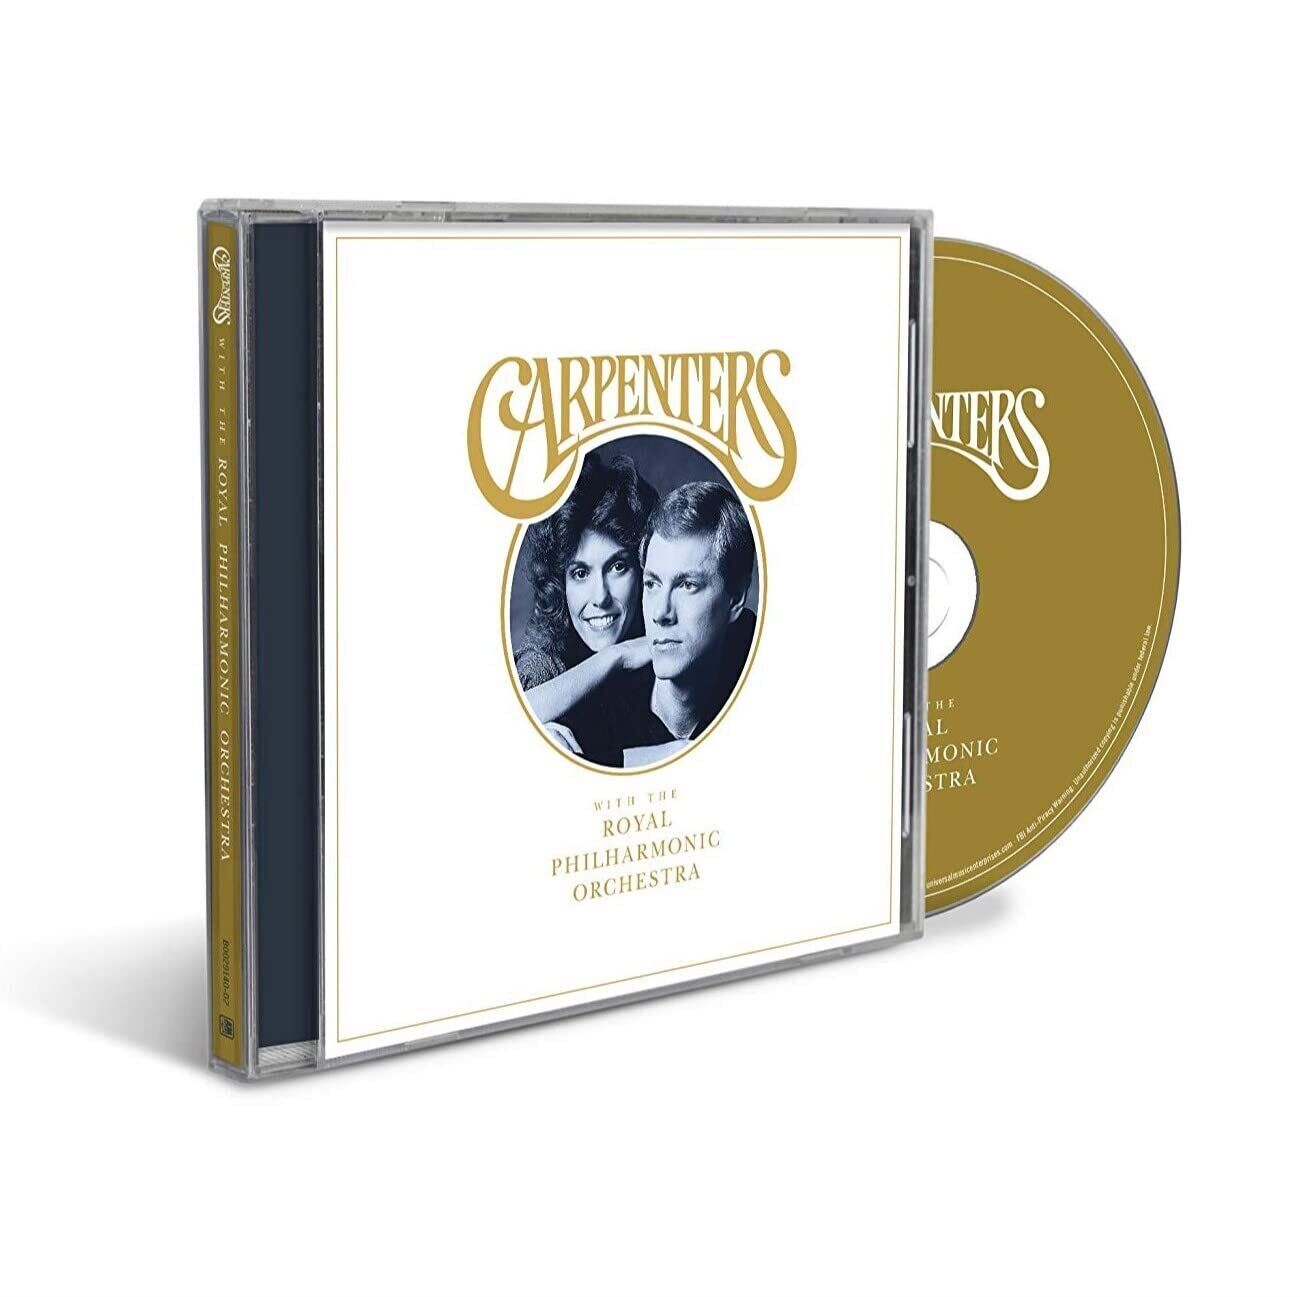 Carpenters Carpenters With The Royal Philharmonic Orchestra (CD)